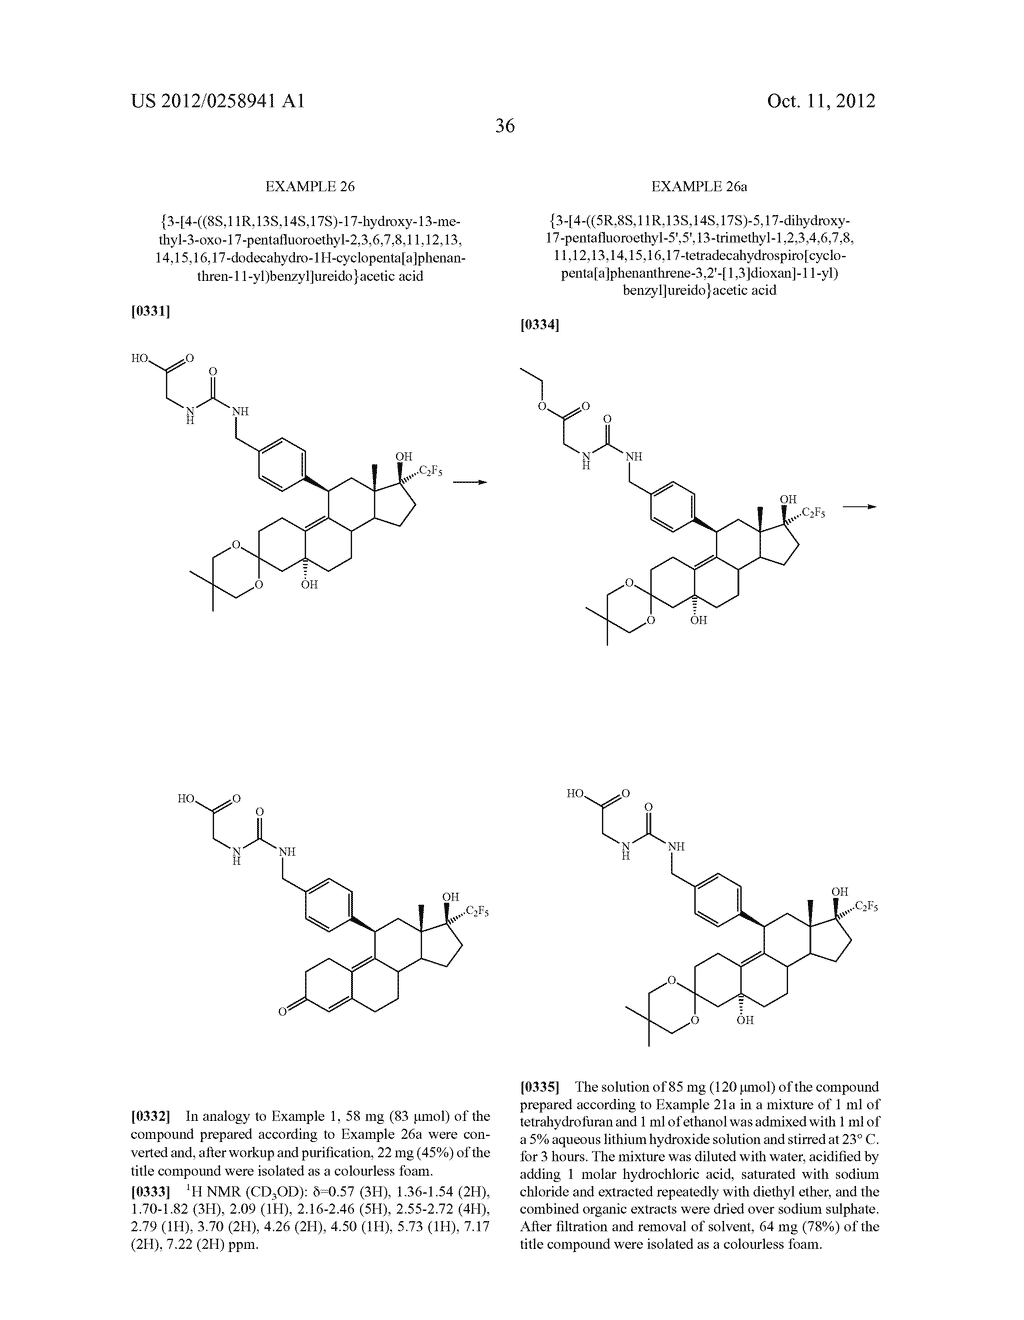 17-HYDROXY-17-PENTAFLUORETHYL-ESTRA-4,9(10)-DIEN-11-ARYL DERIVATIVES,     METHODS FOR THE PRODUCTION THEREOF AND THE USE THEREOF FOR TREATING     DISEASES - diagram, schematic, and image 37